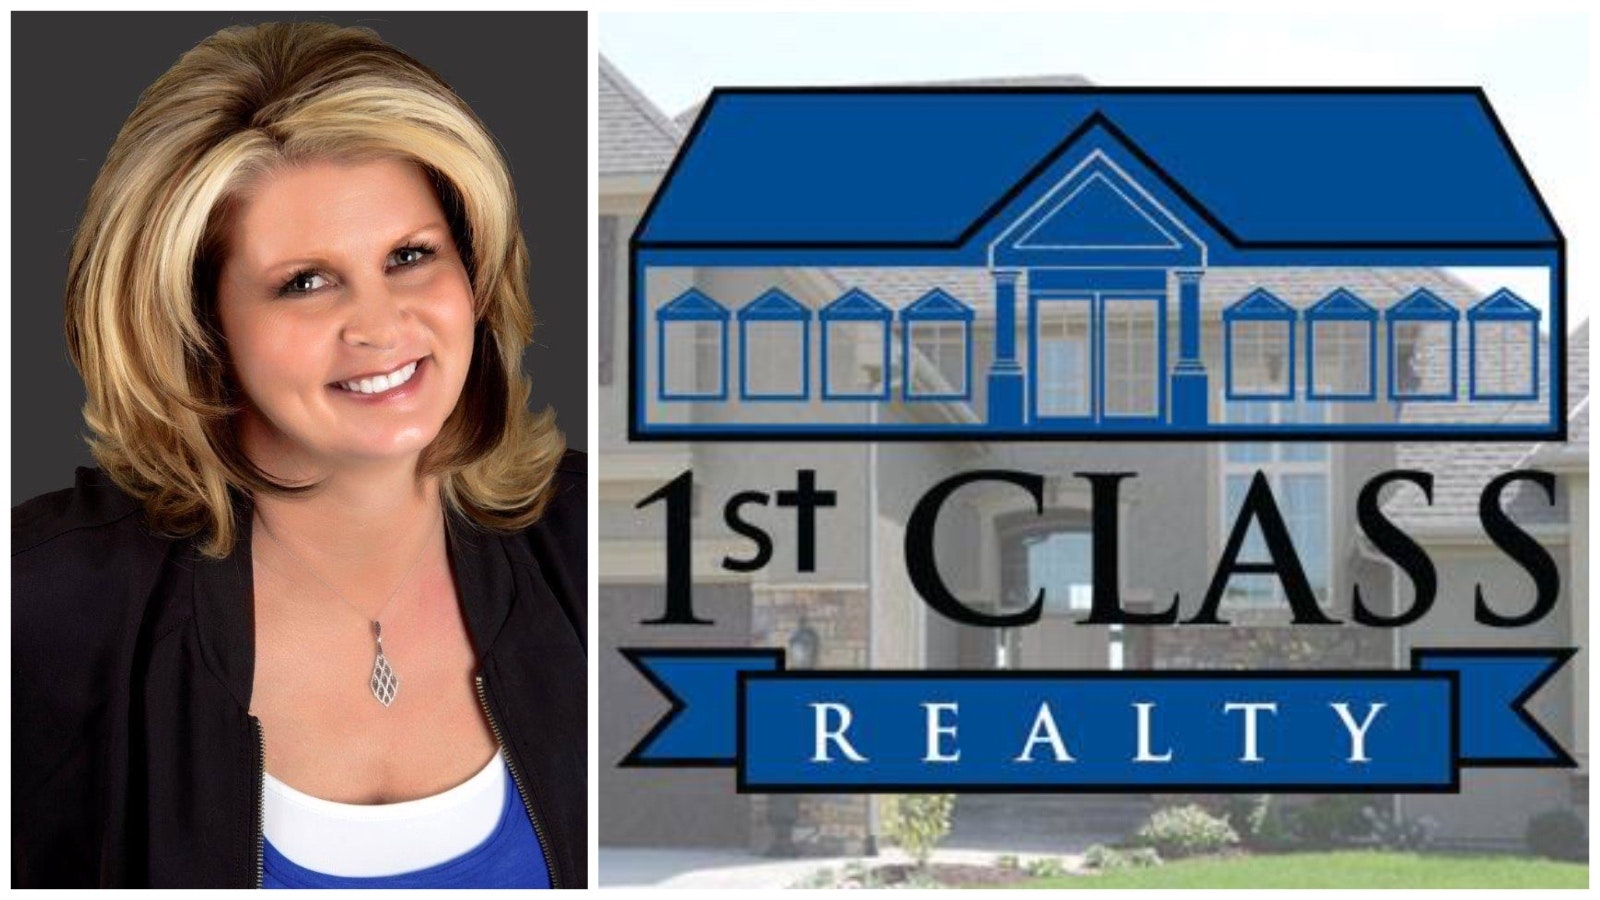 Tami Hinson owns 1st Class Realty in Gillette, Wyoming.